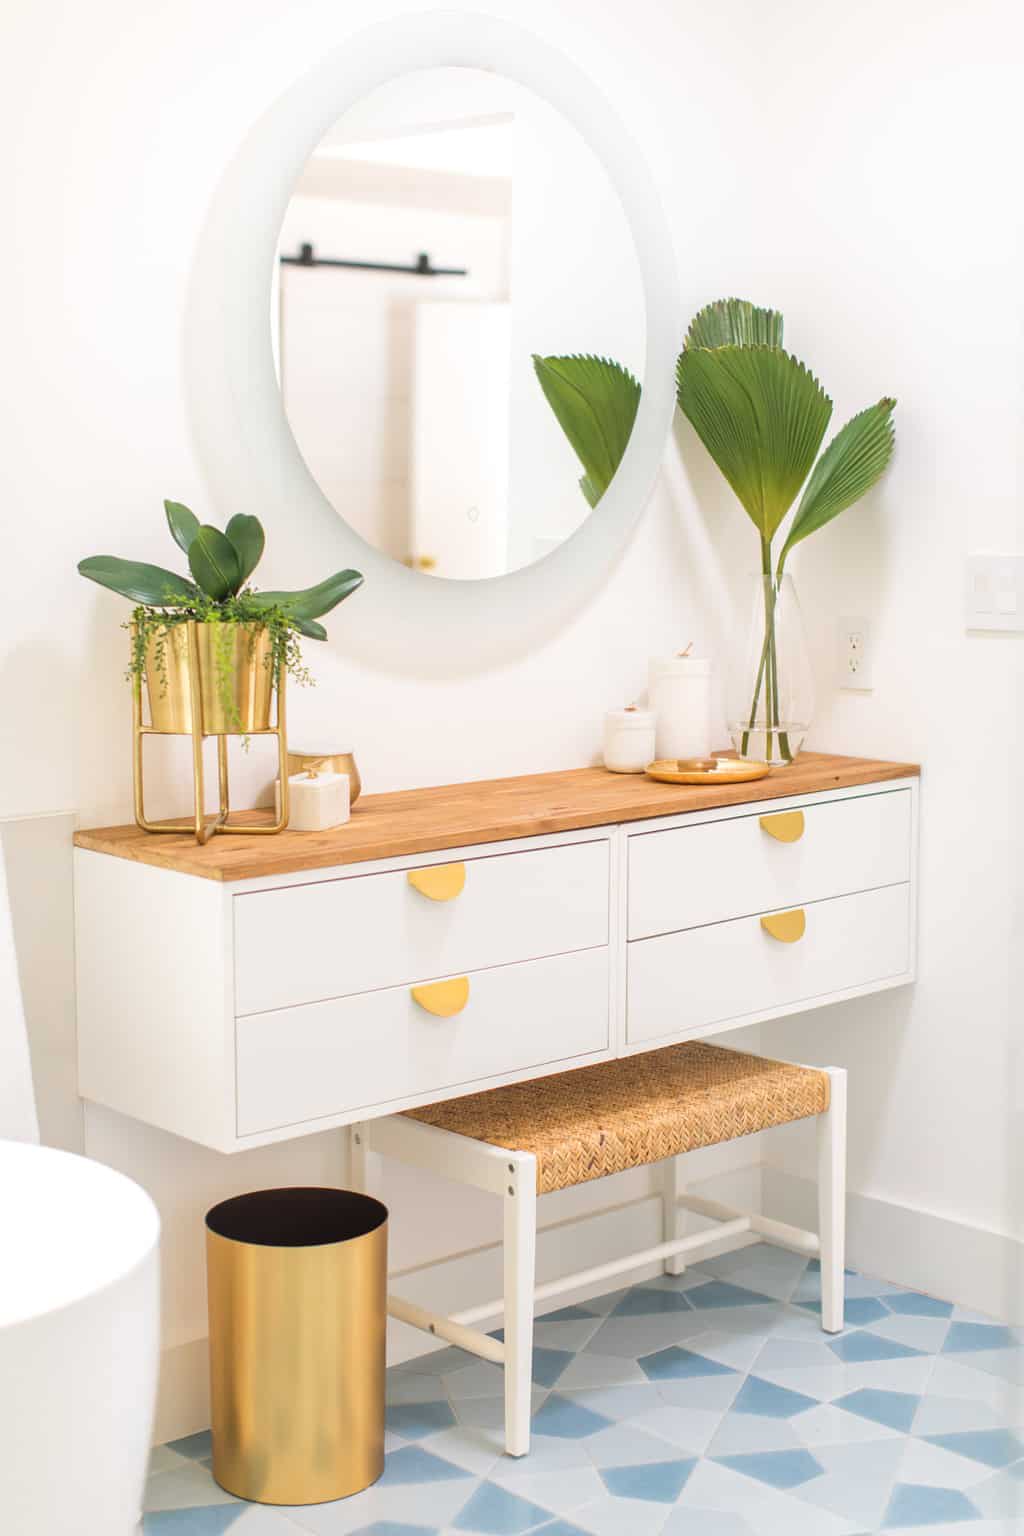 25 Stylish And Smart IKEA Hacks For Your Entryway - DigsDigs